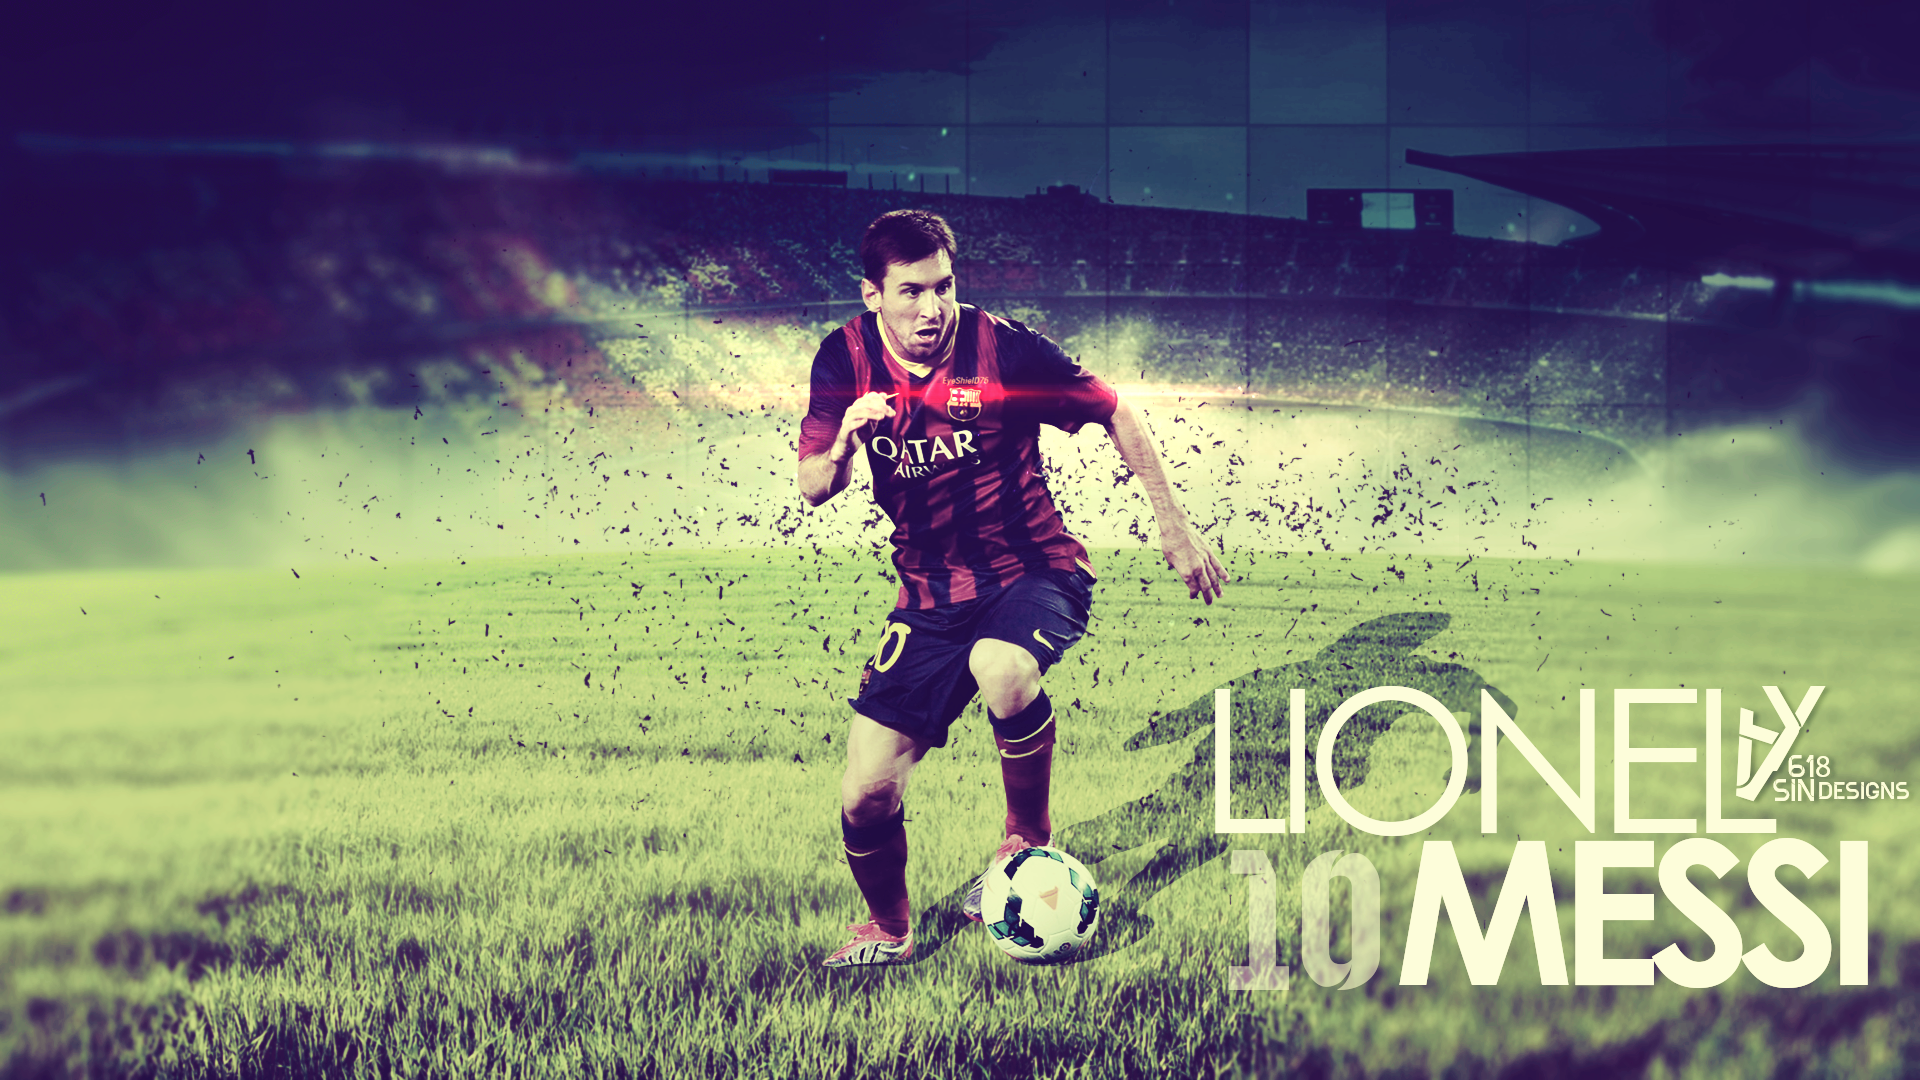 Full HD Lionel Messi 1920x1080 Wallpapers 